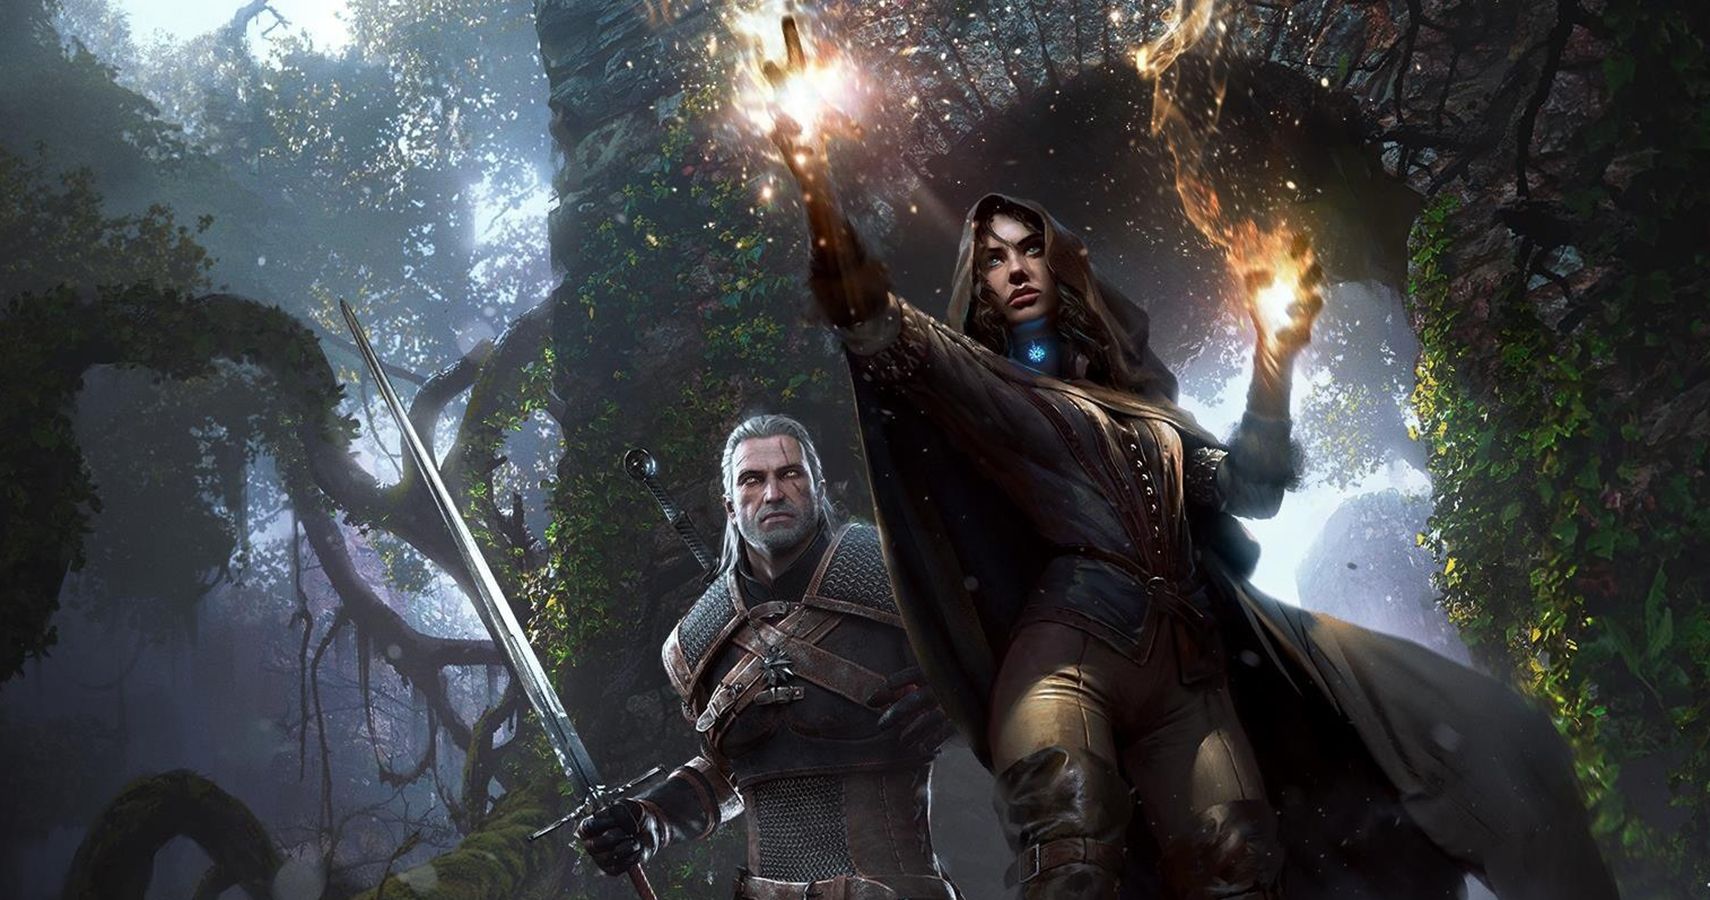 geralt and yennefer in action